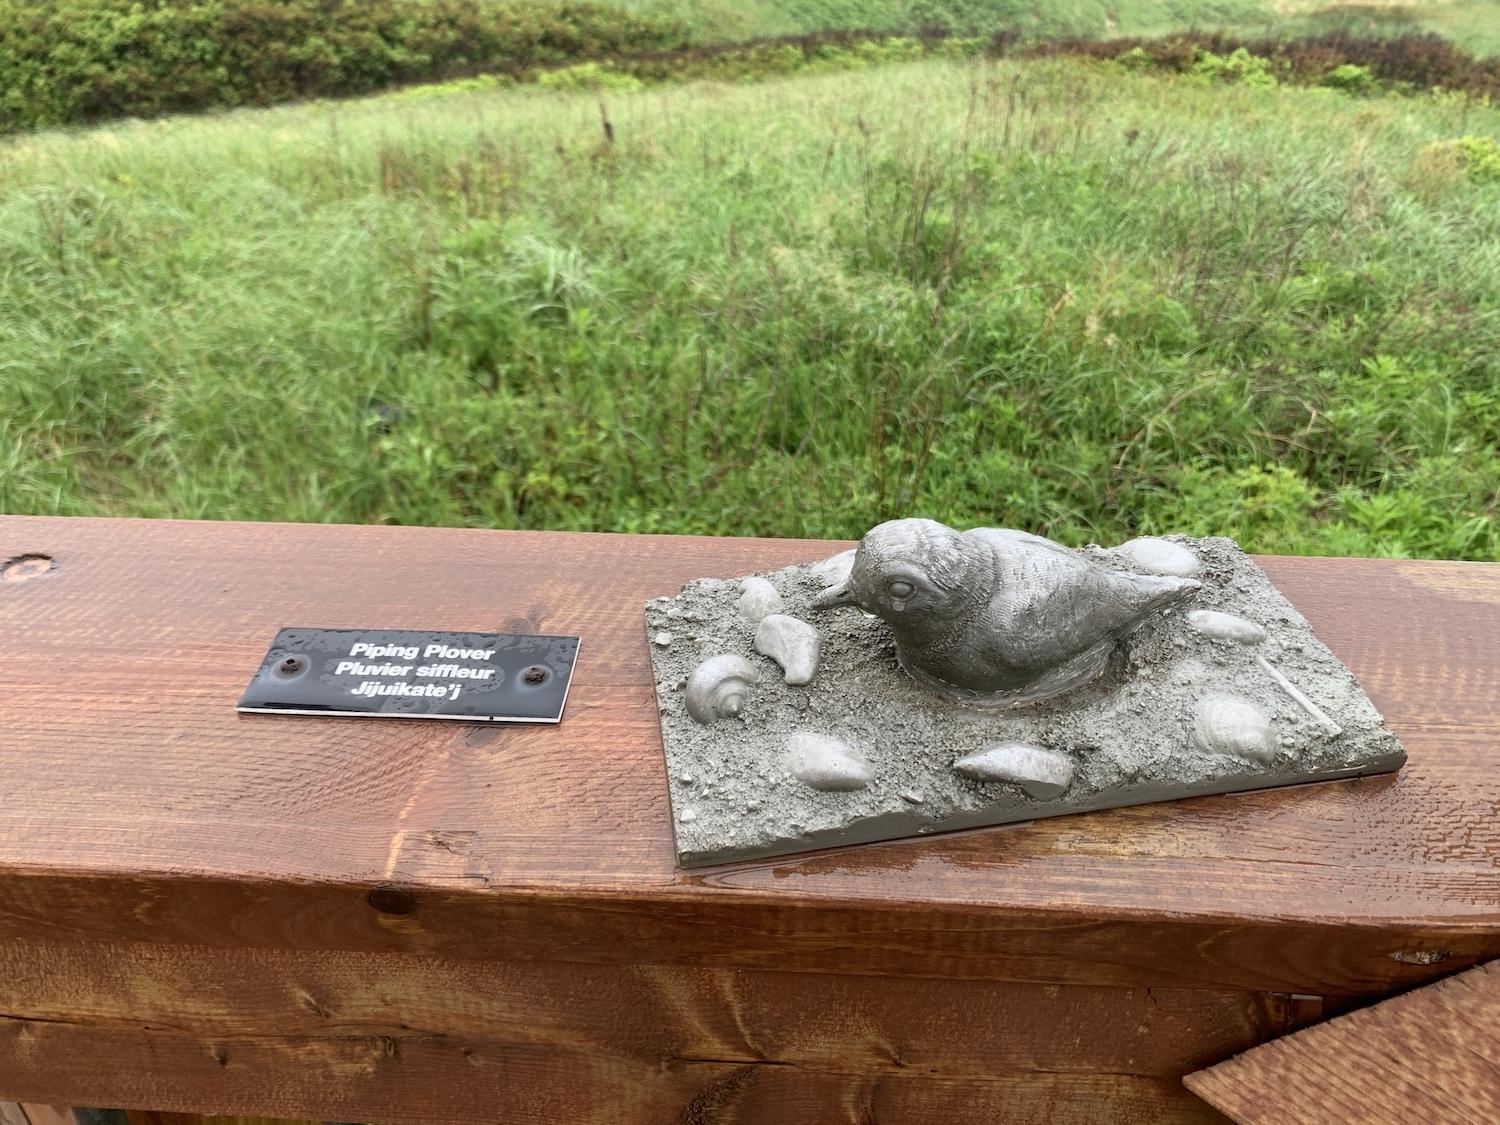 In June 2022, I found this life-size statue of a Piping Plover in the Cavendish area of PEI National Park alongside signage welcoming visitors to the Piping Plover's home.